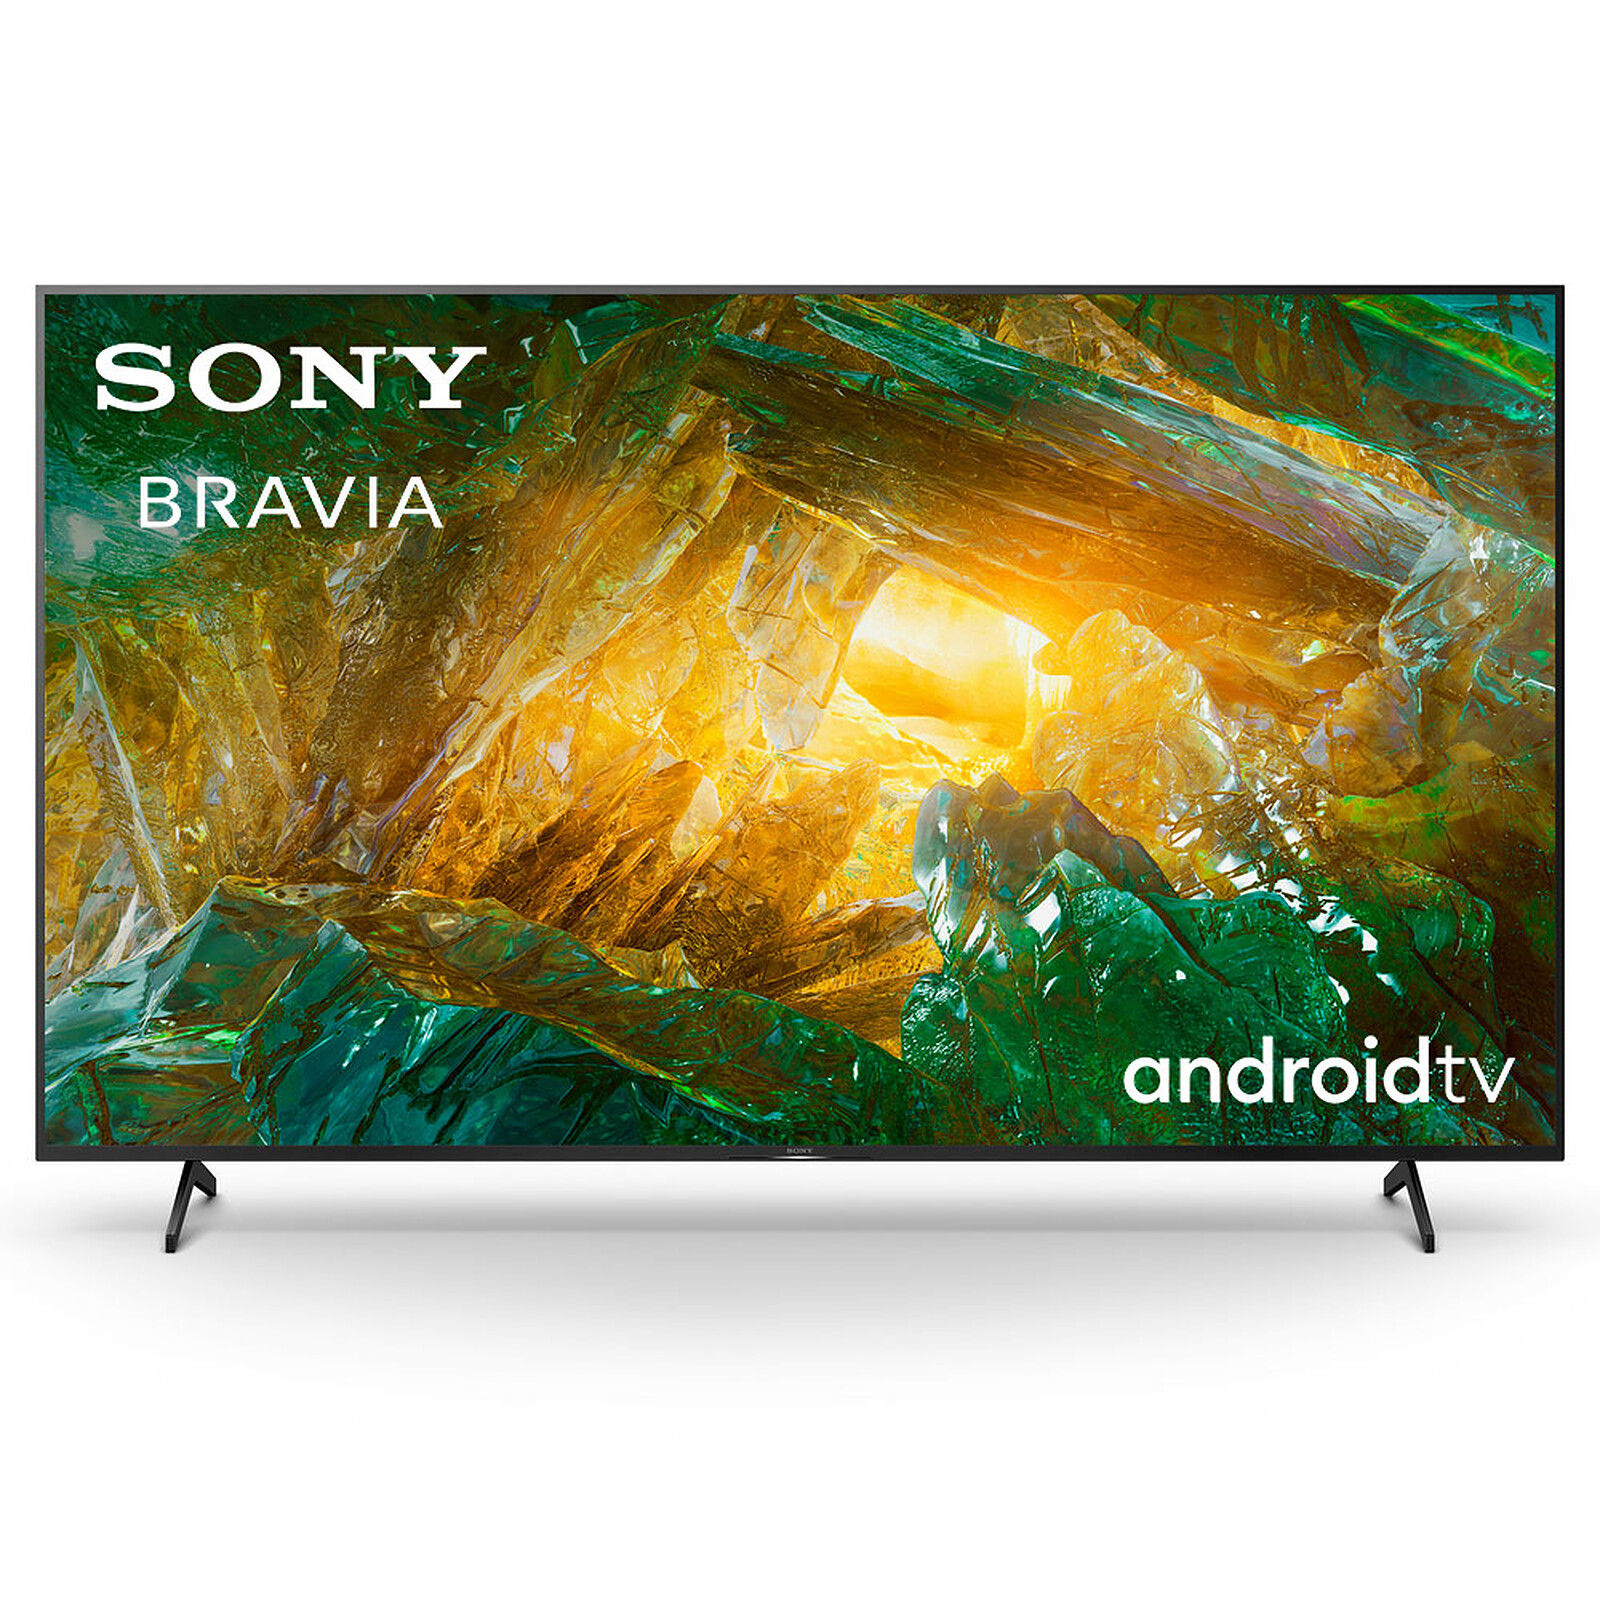 sony 55xh8096 4k android tv